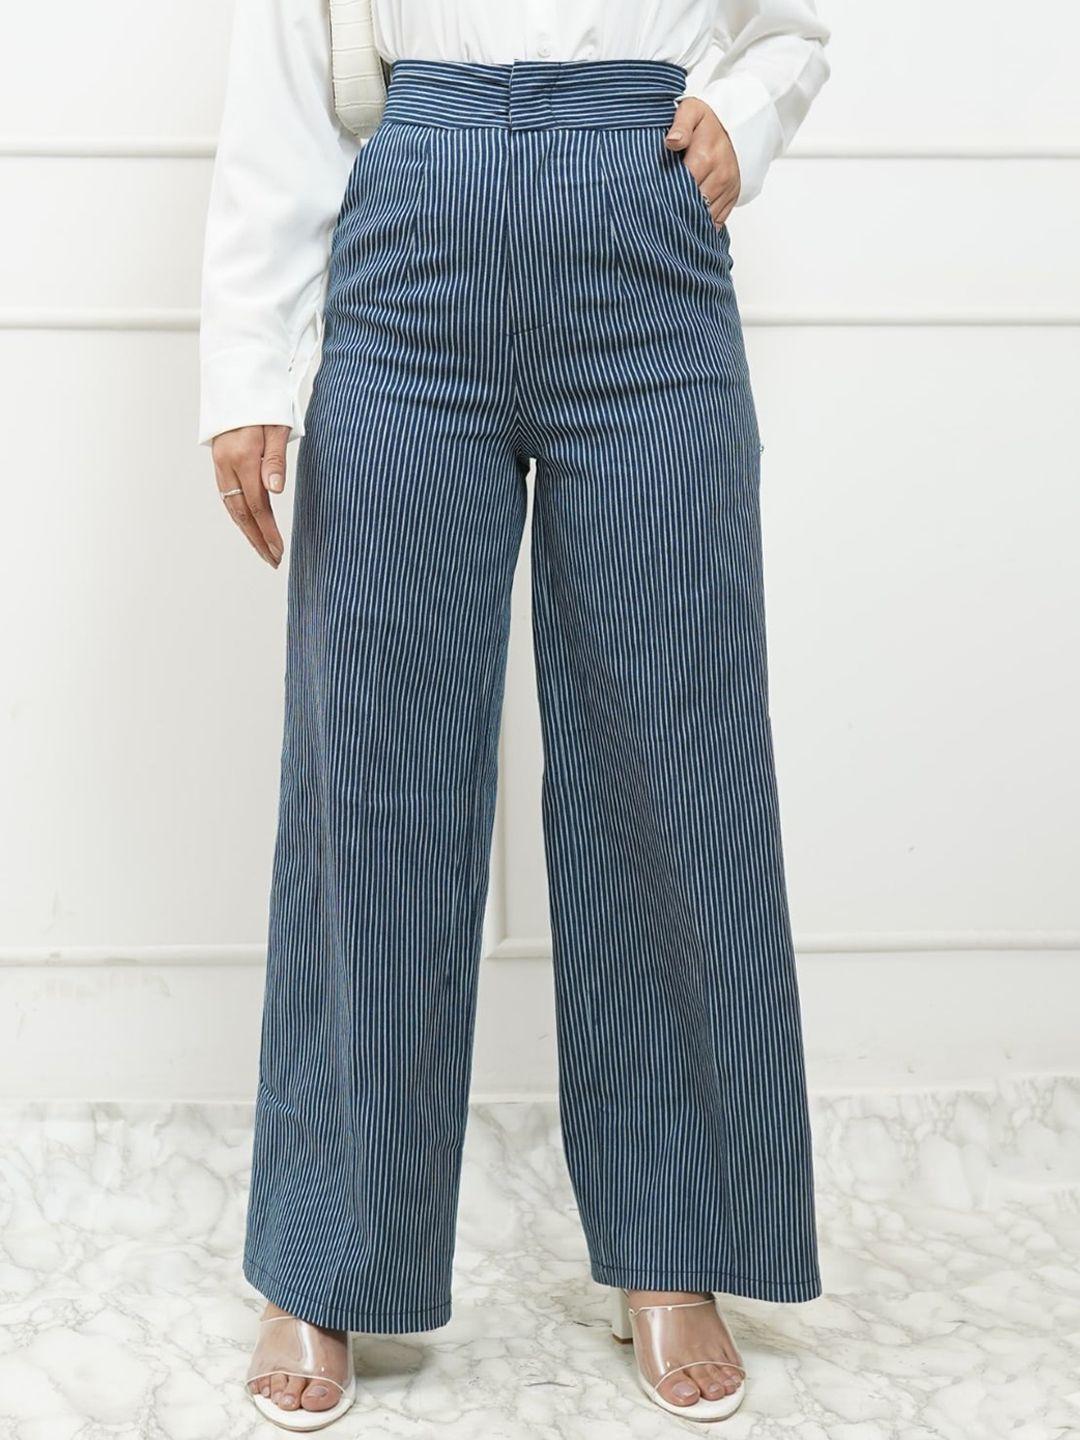 styleash-women-striped-high-rise-formal-parallel-trousers